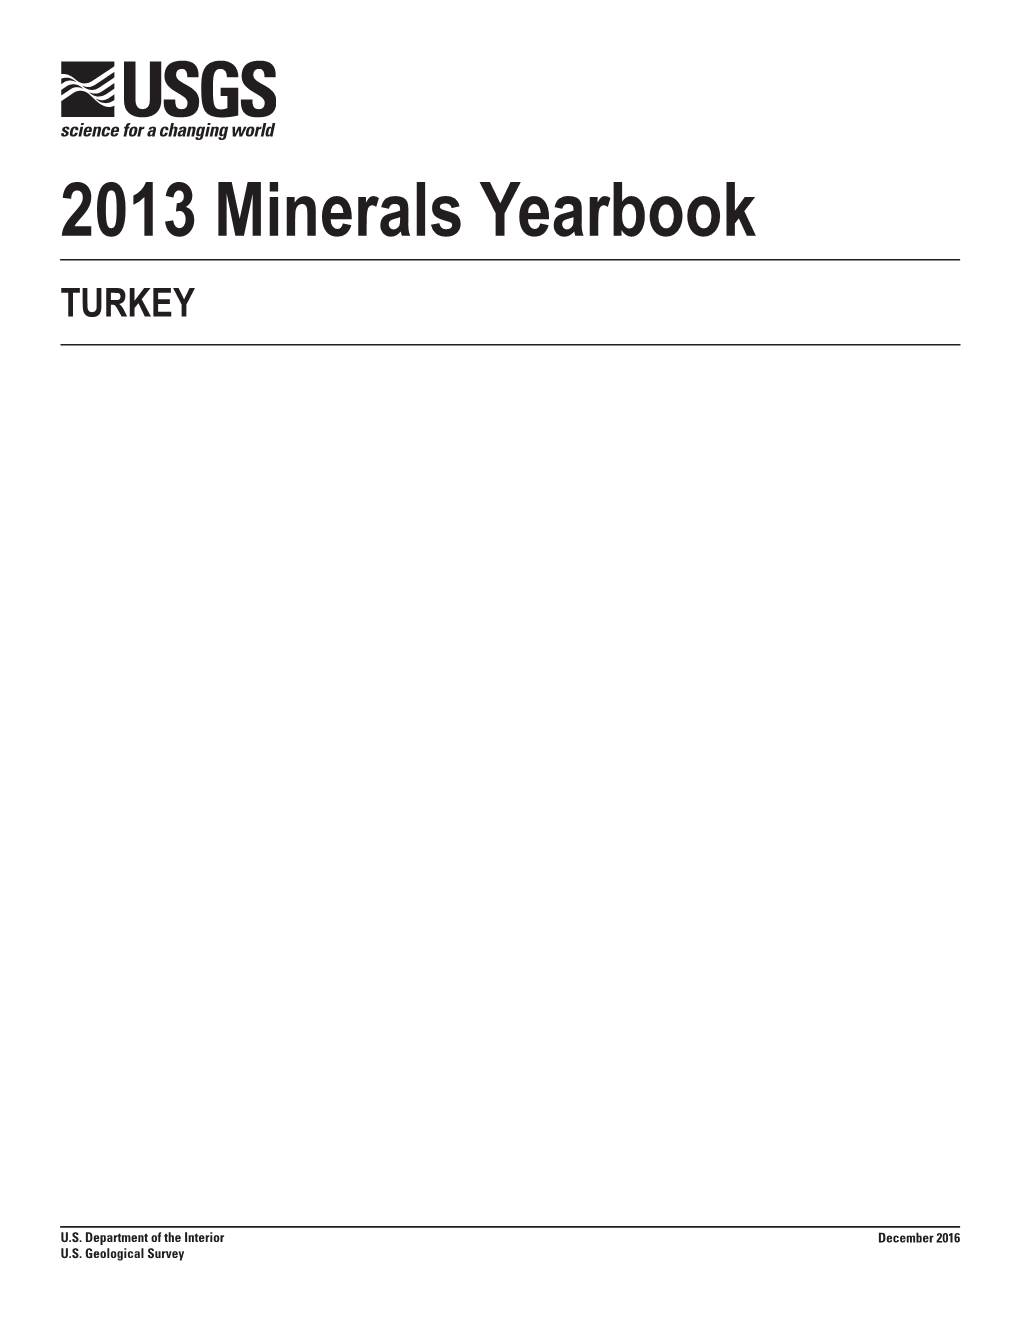 The Mineral Industry of Turkey in 2013